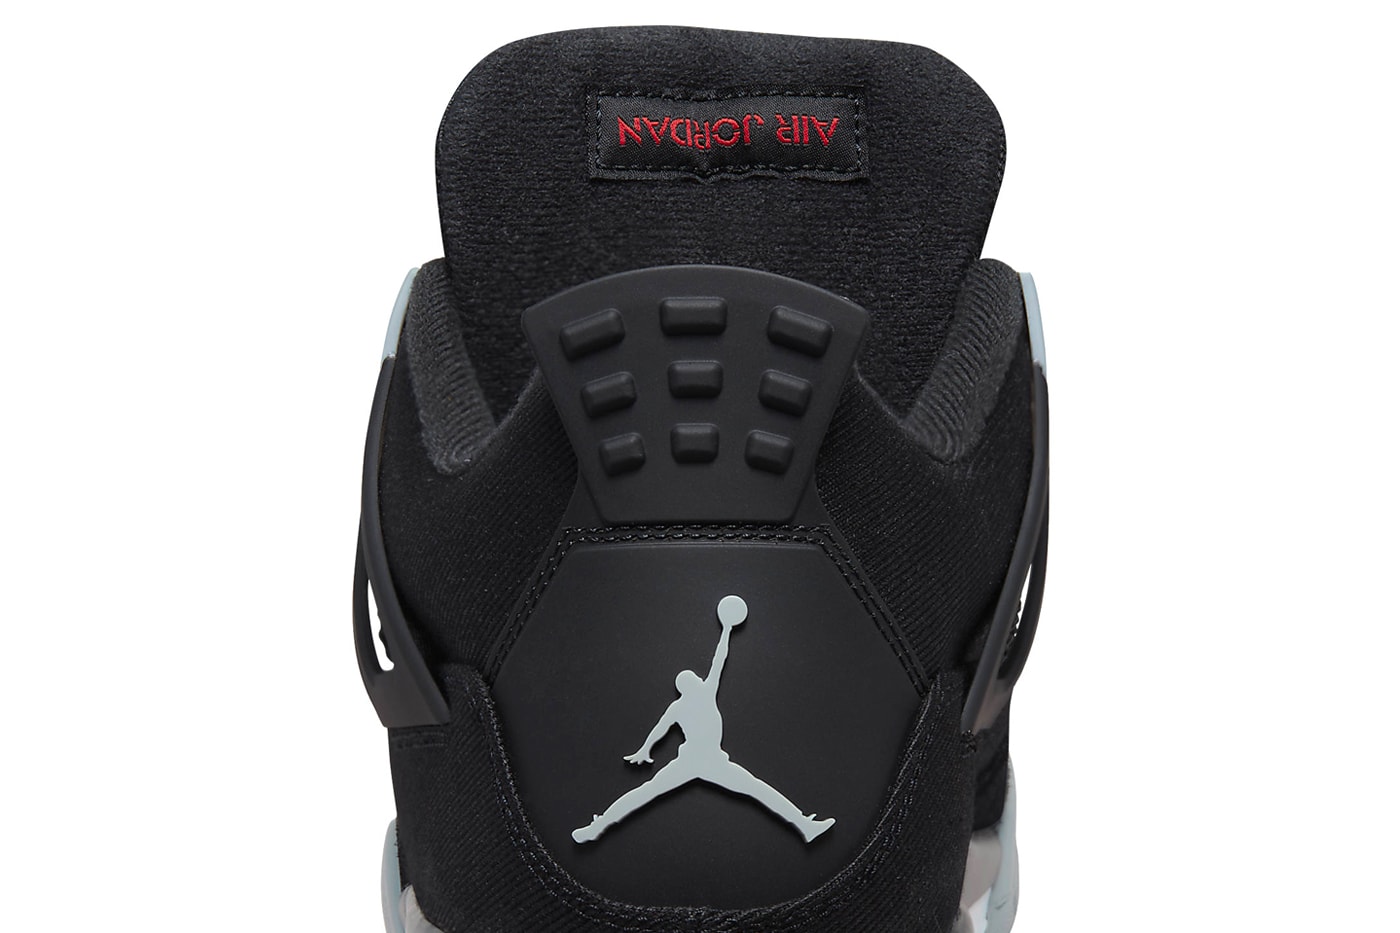 Air Jordan 4 Black Canvas Official Look Release Info DH7138-006 Date Buy Price Black Light Steel Grey White Fire Red